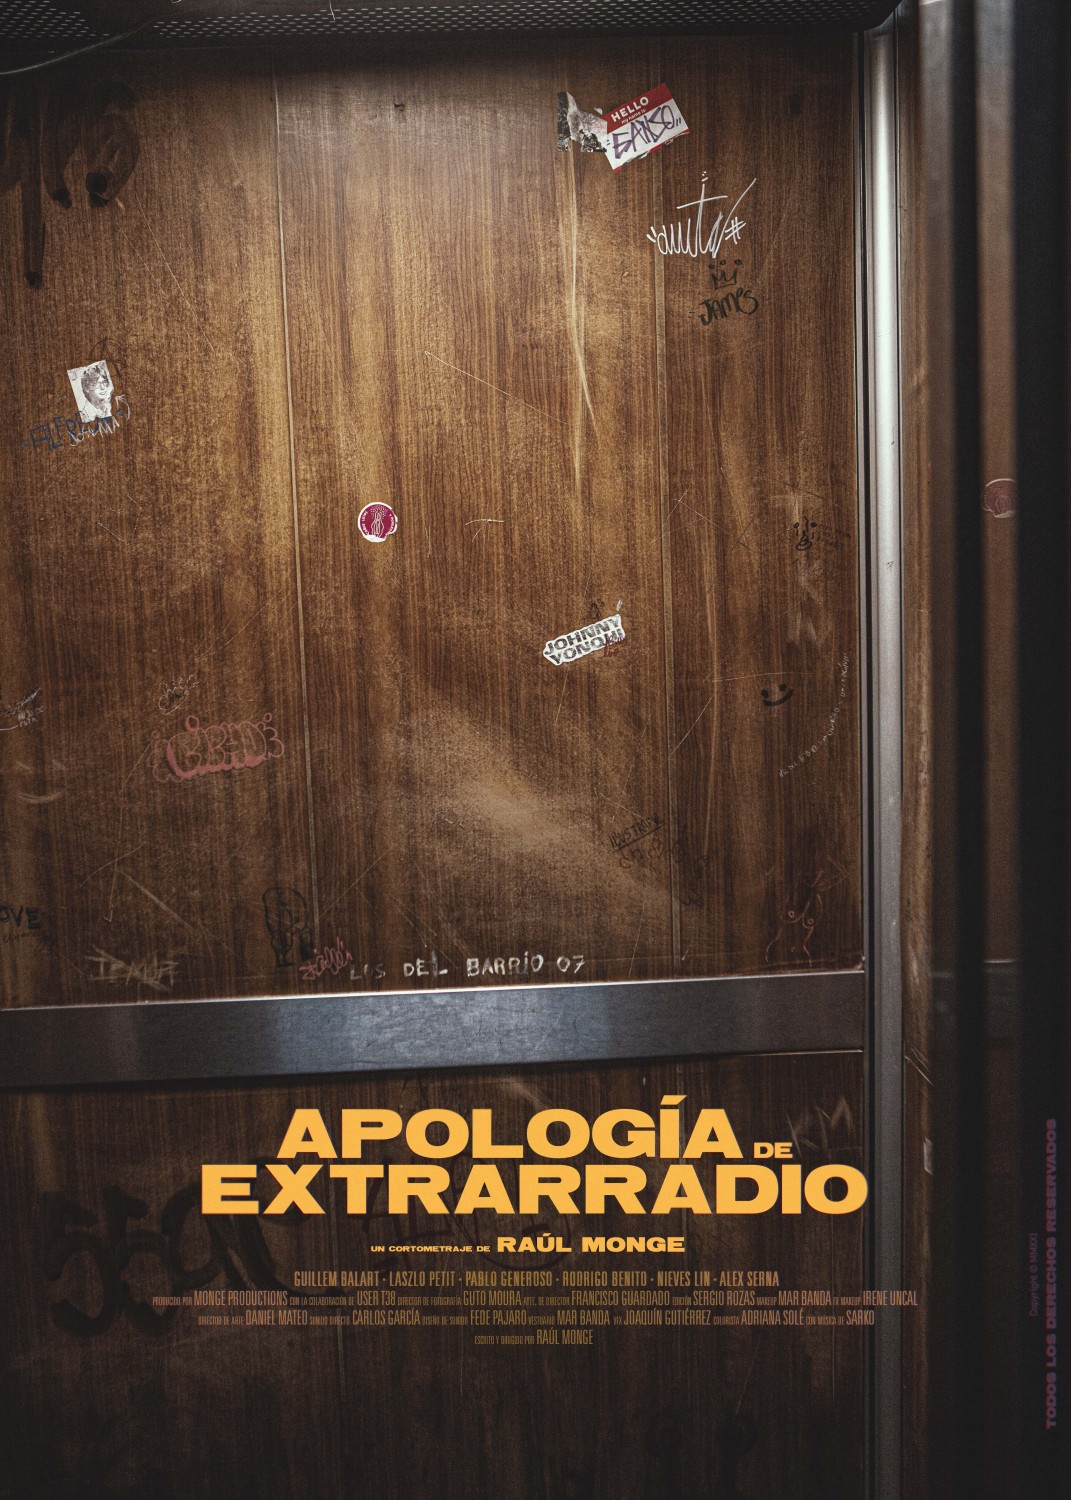 Extra Large Movie Poster Image for Apologia del extrarradio